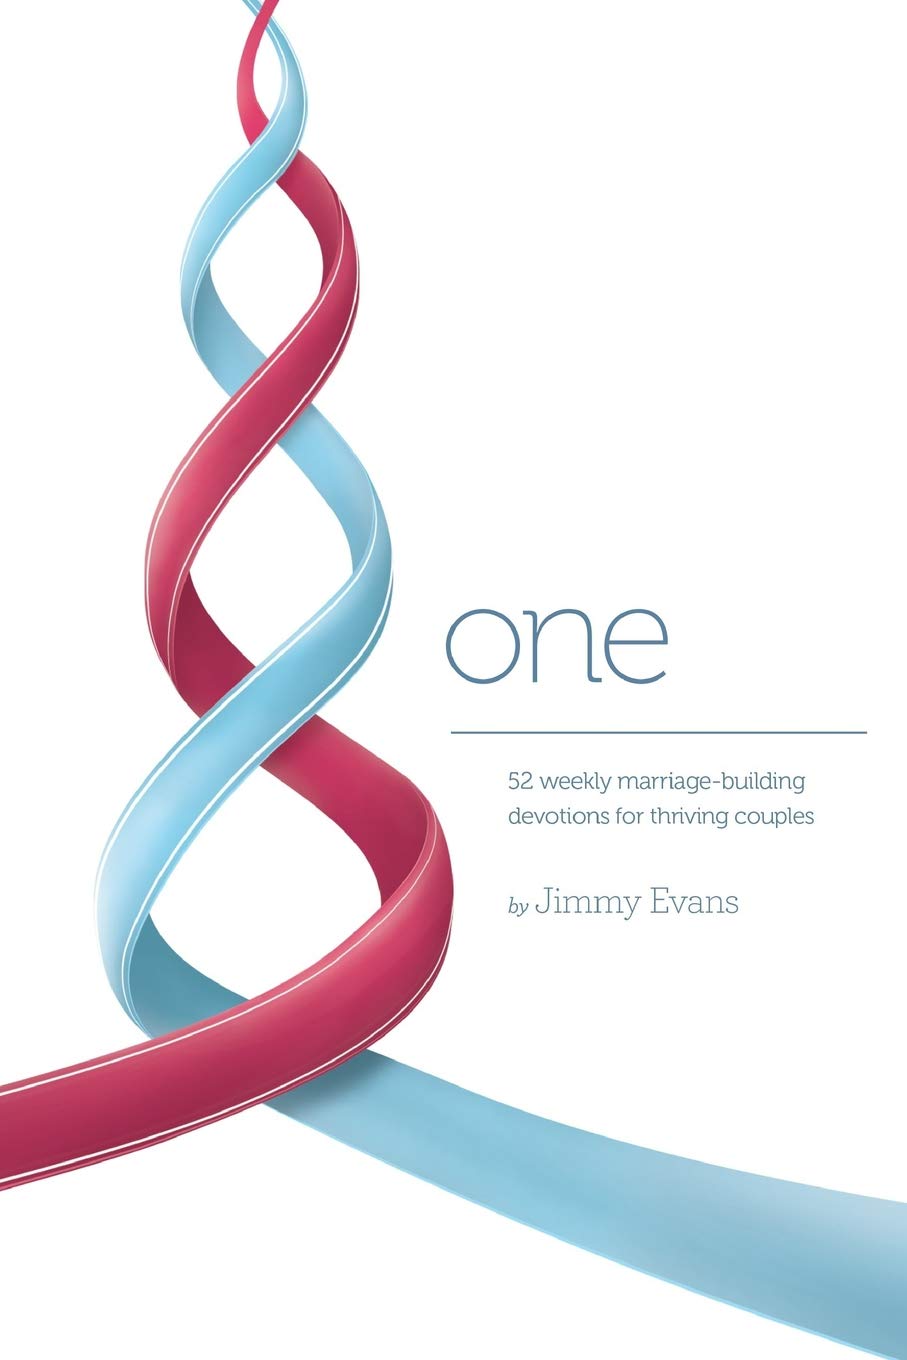 One: 52 Weekly Marriage-Building Devotions for Thriving Couples (A Marriage On The Rock Book) Paperback – 26 Nov 2018